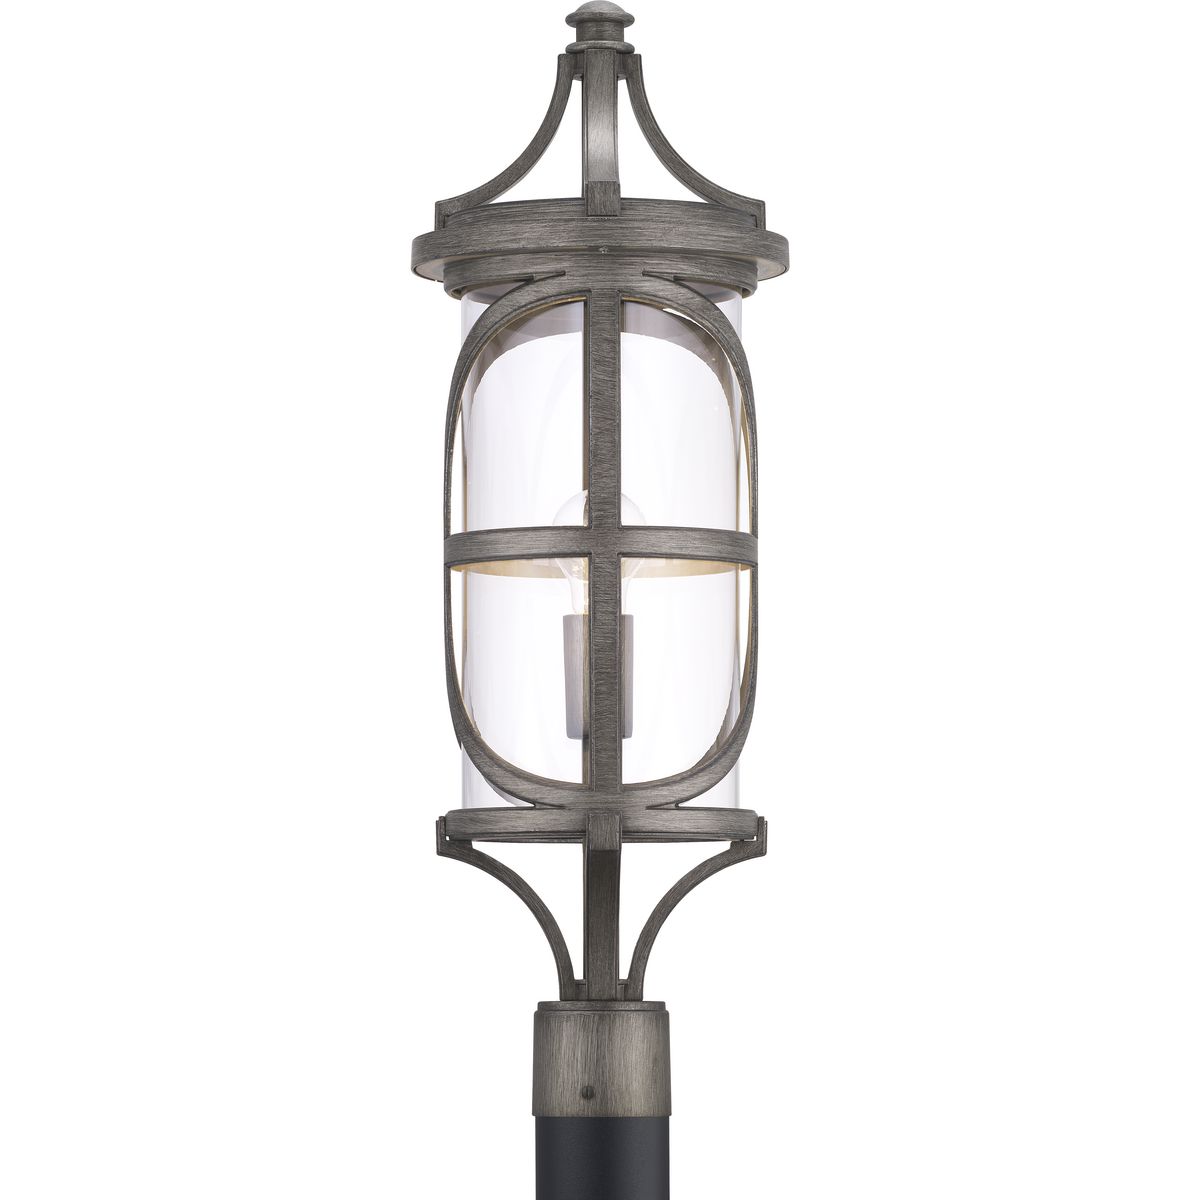 The Morrison Collection post lantern blends delicate geometric patterns with lasting durability in a modern form. Intricate die cast aluminum construction is paired with clear glass and an Antique Pewter finish.